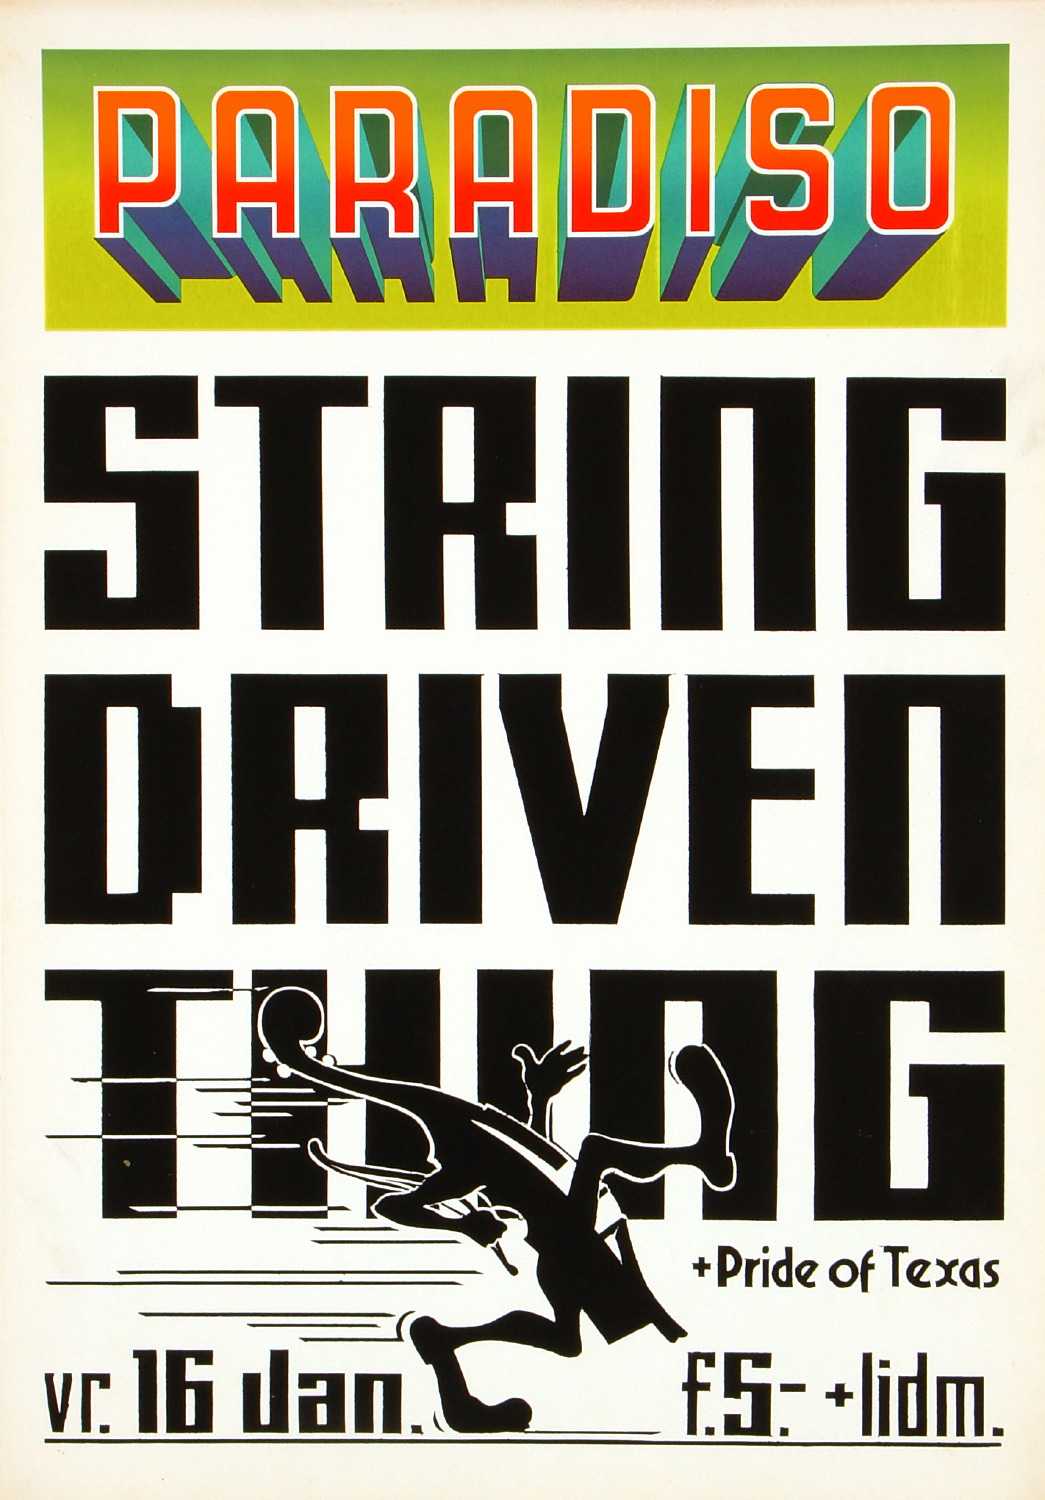 Featured image for “String driven Thing - 16 januari 1976”